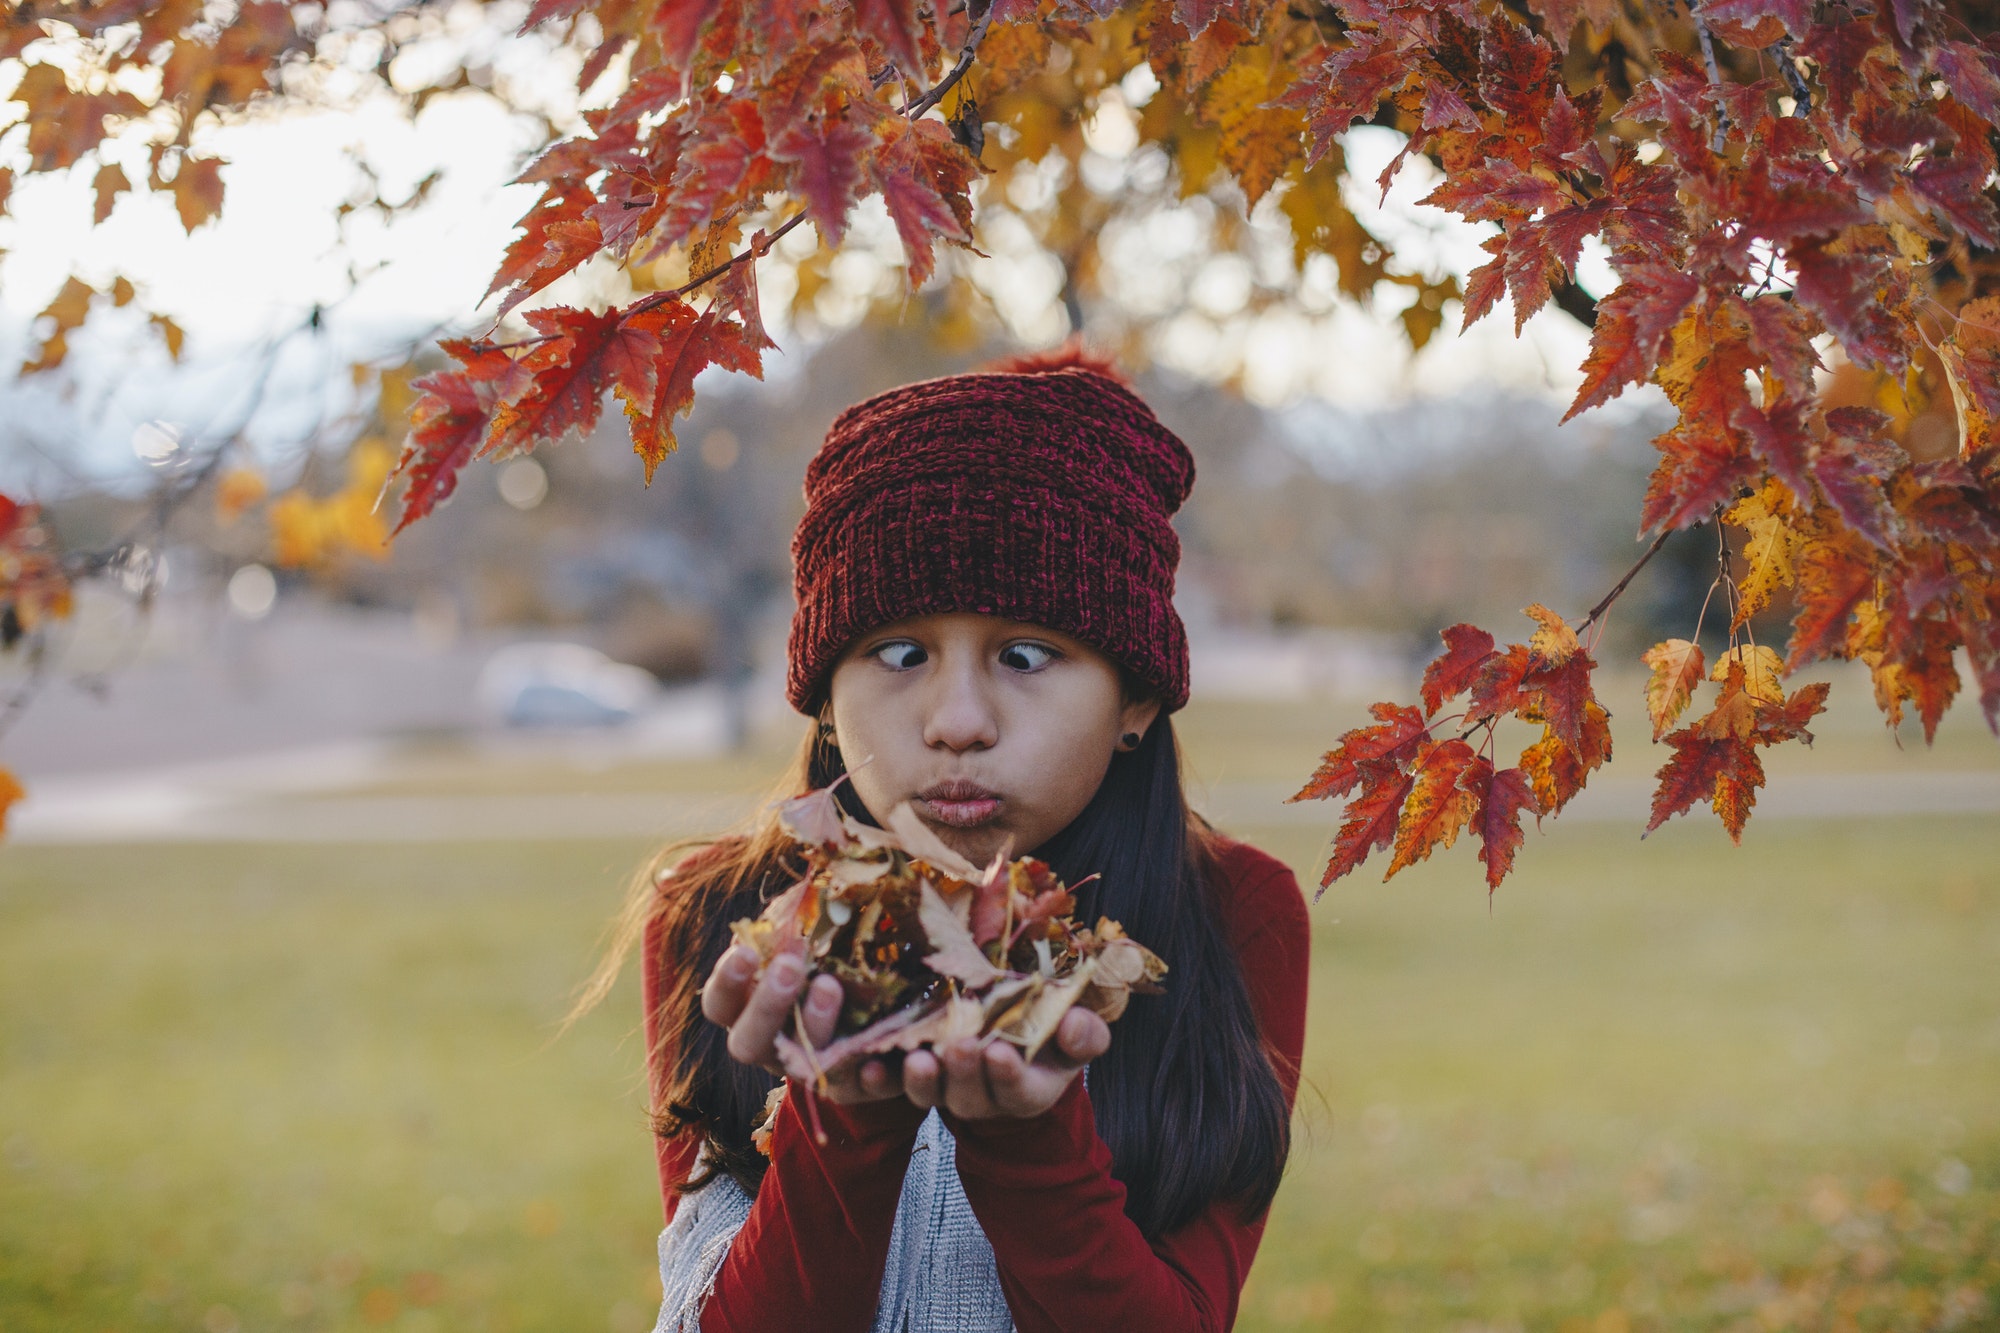 Young girl holding autumn leaves and making a funny face